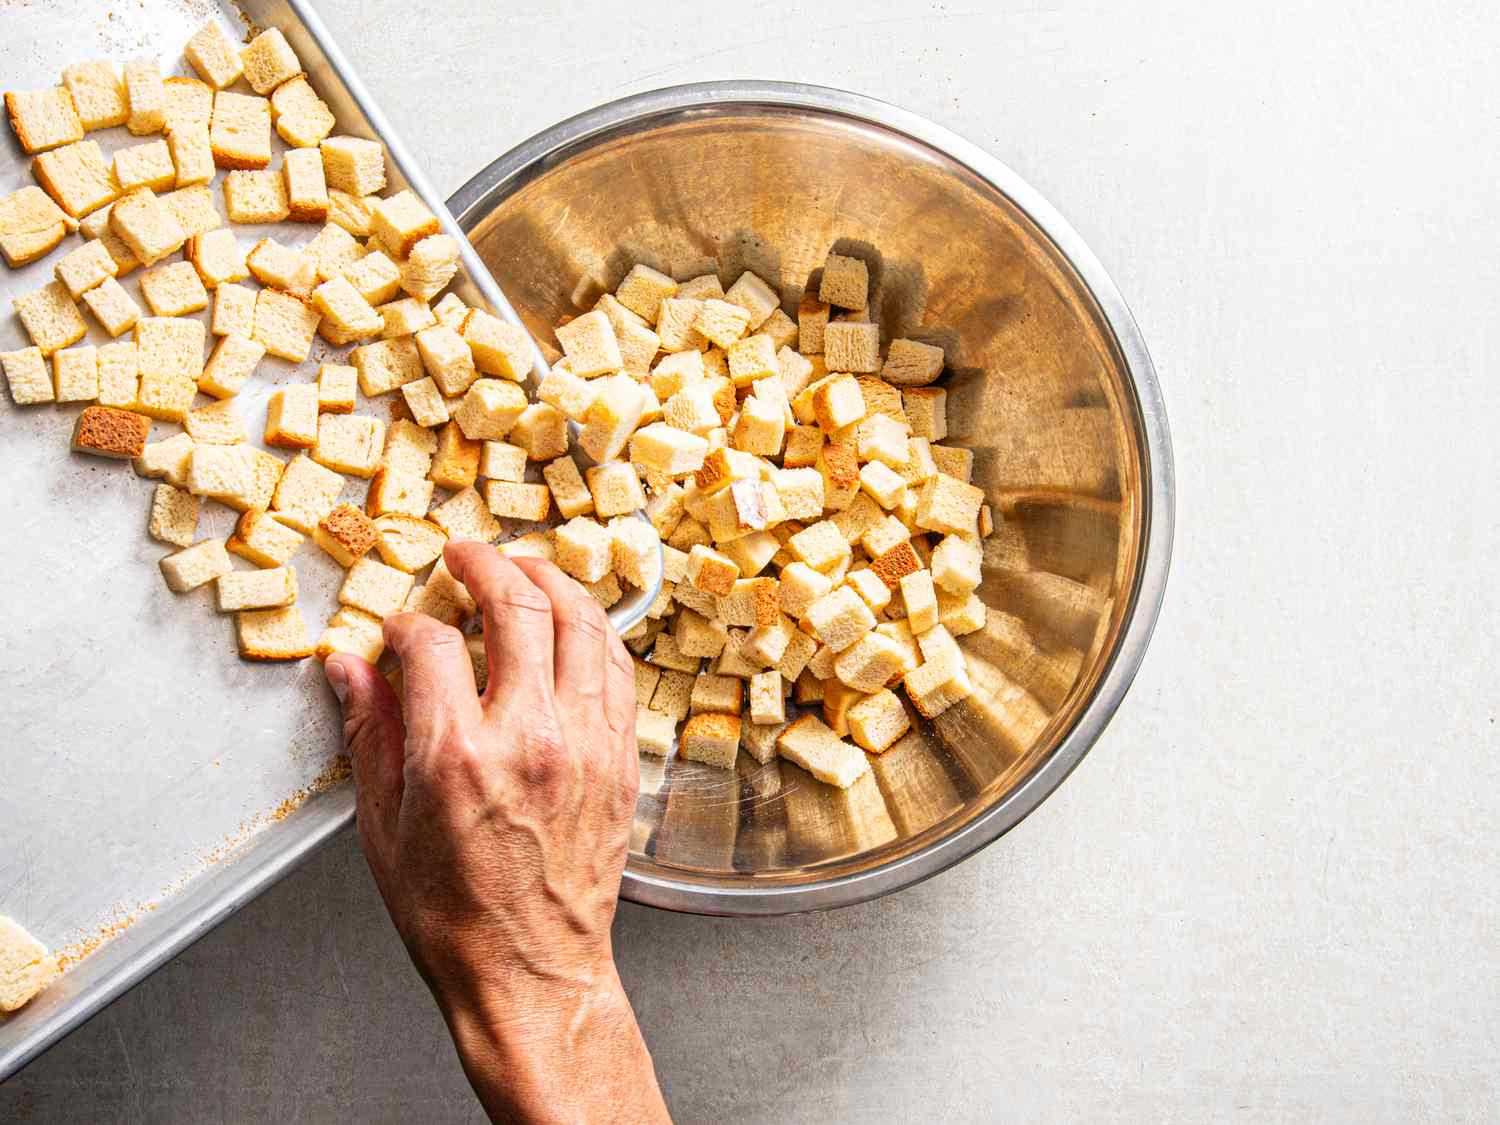 Overhead view of transferring bread cubes to bowl